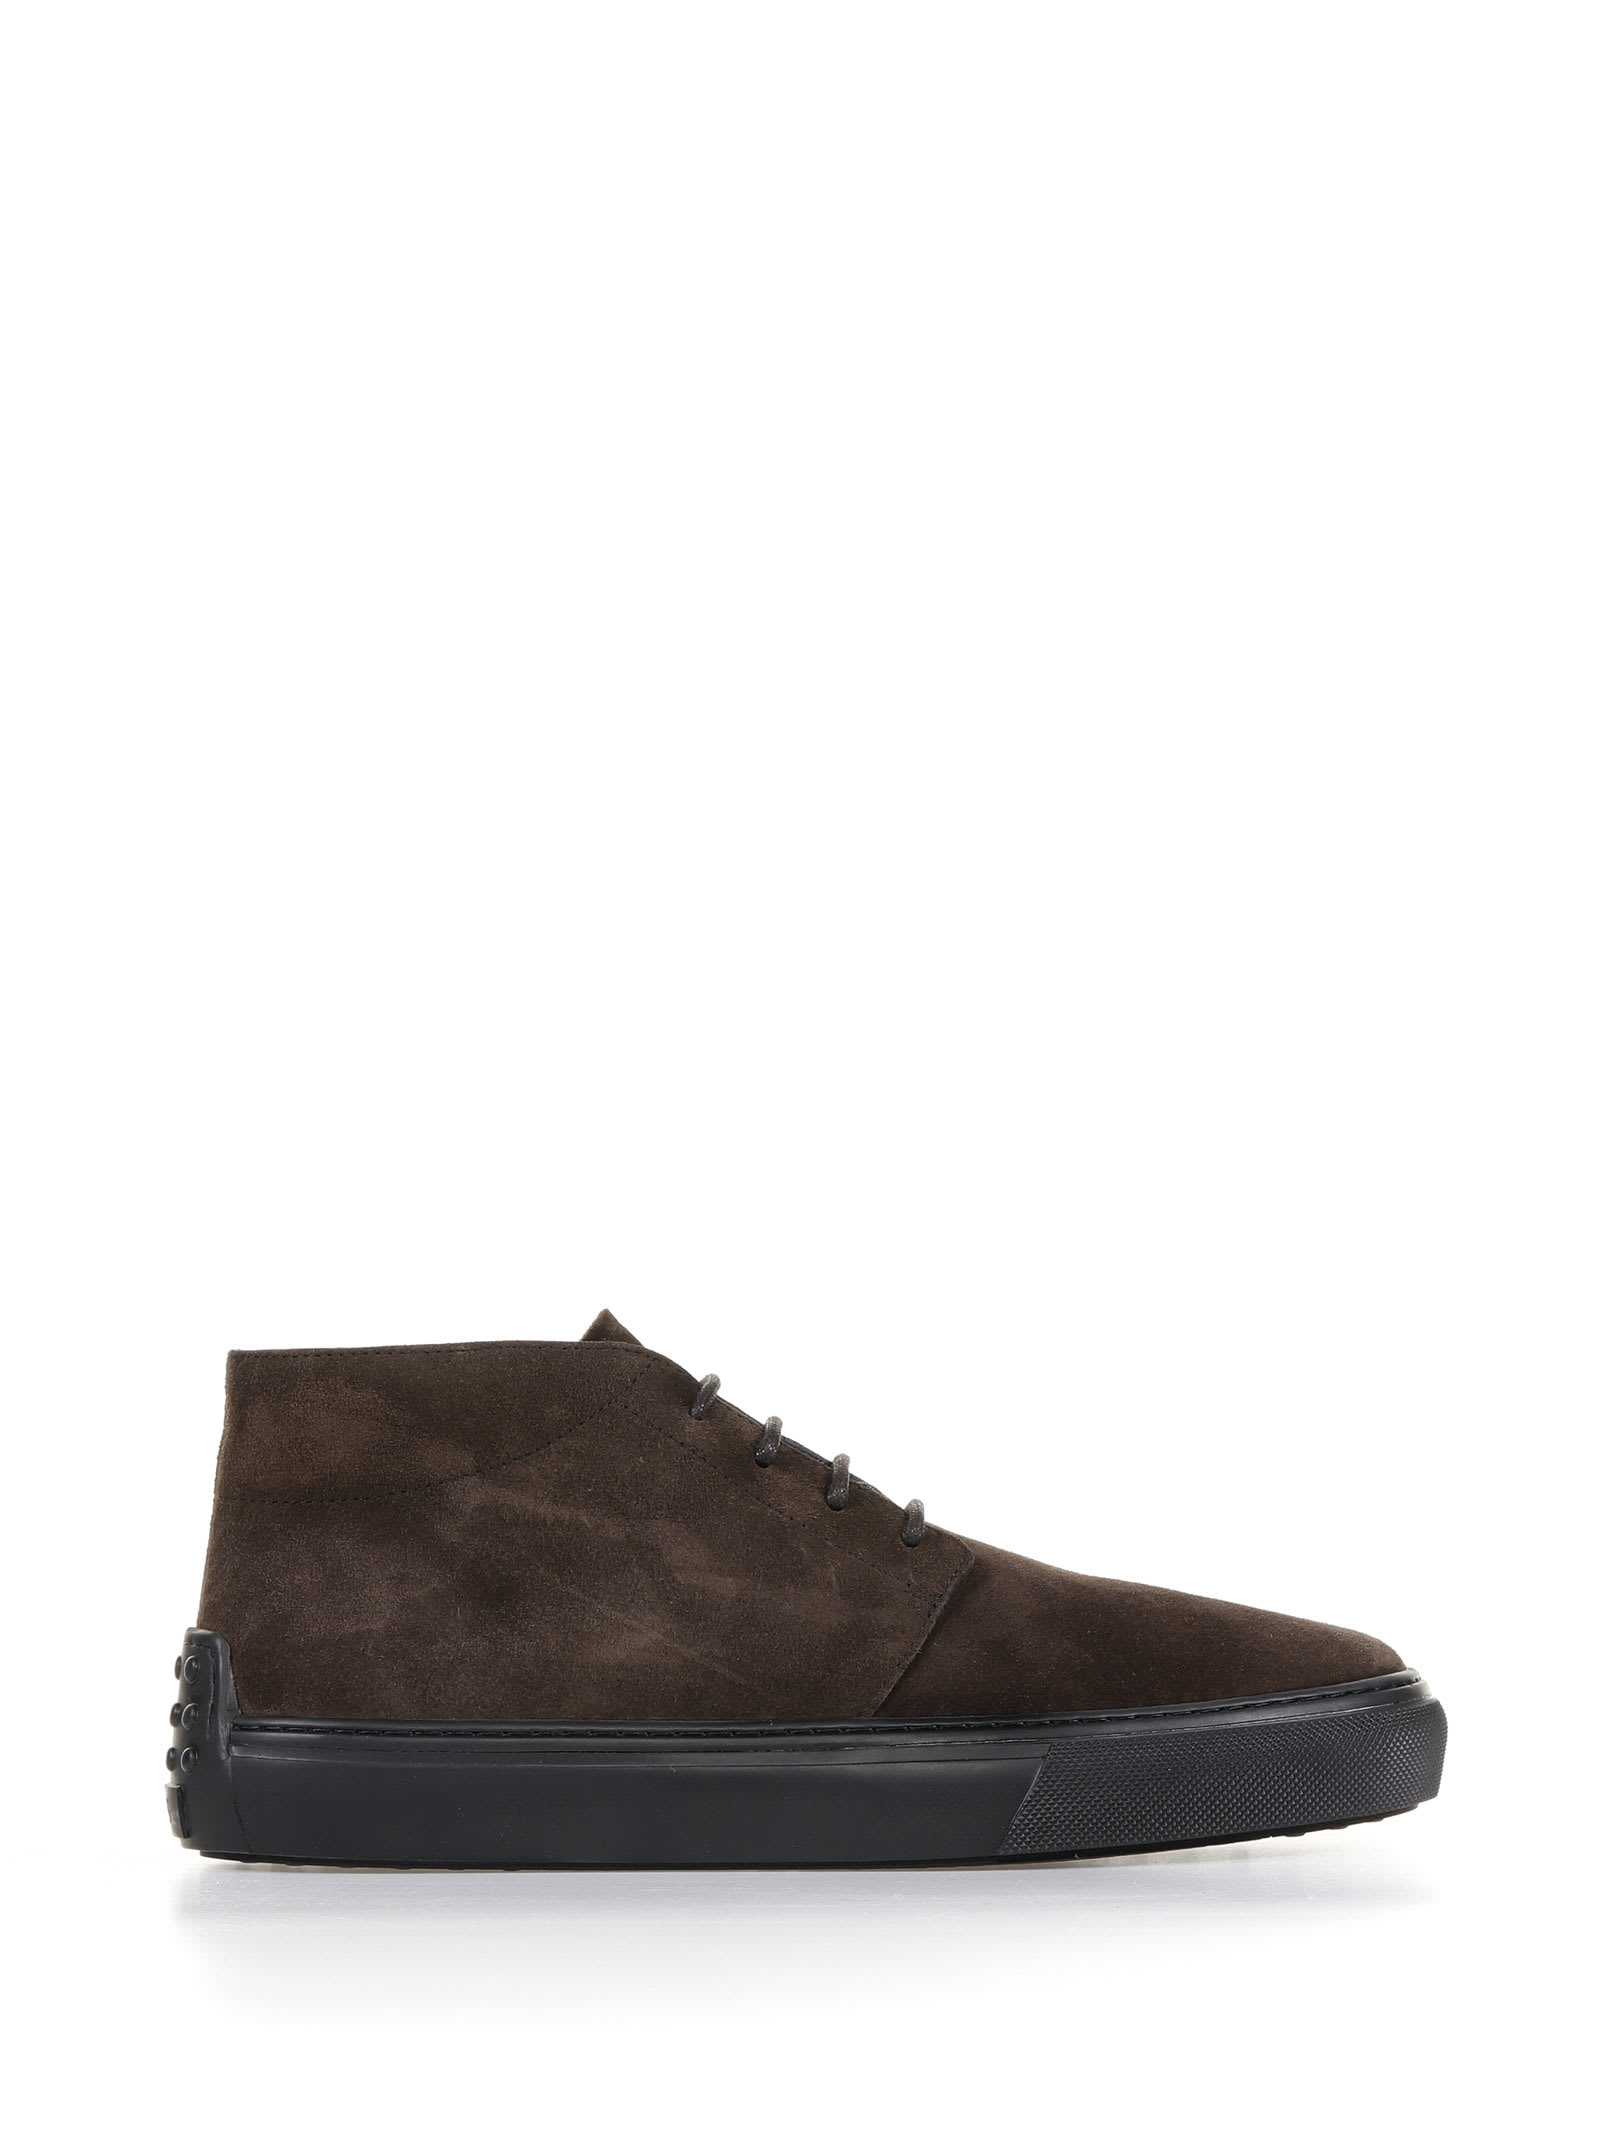 Tods Ankle Boots In Dark Brown Suede Leather